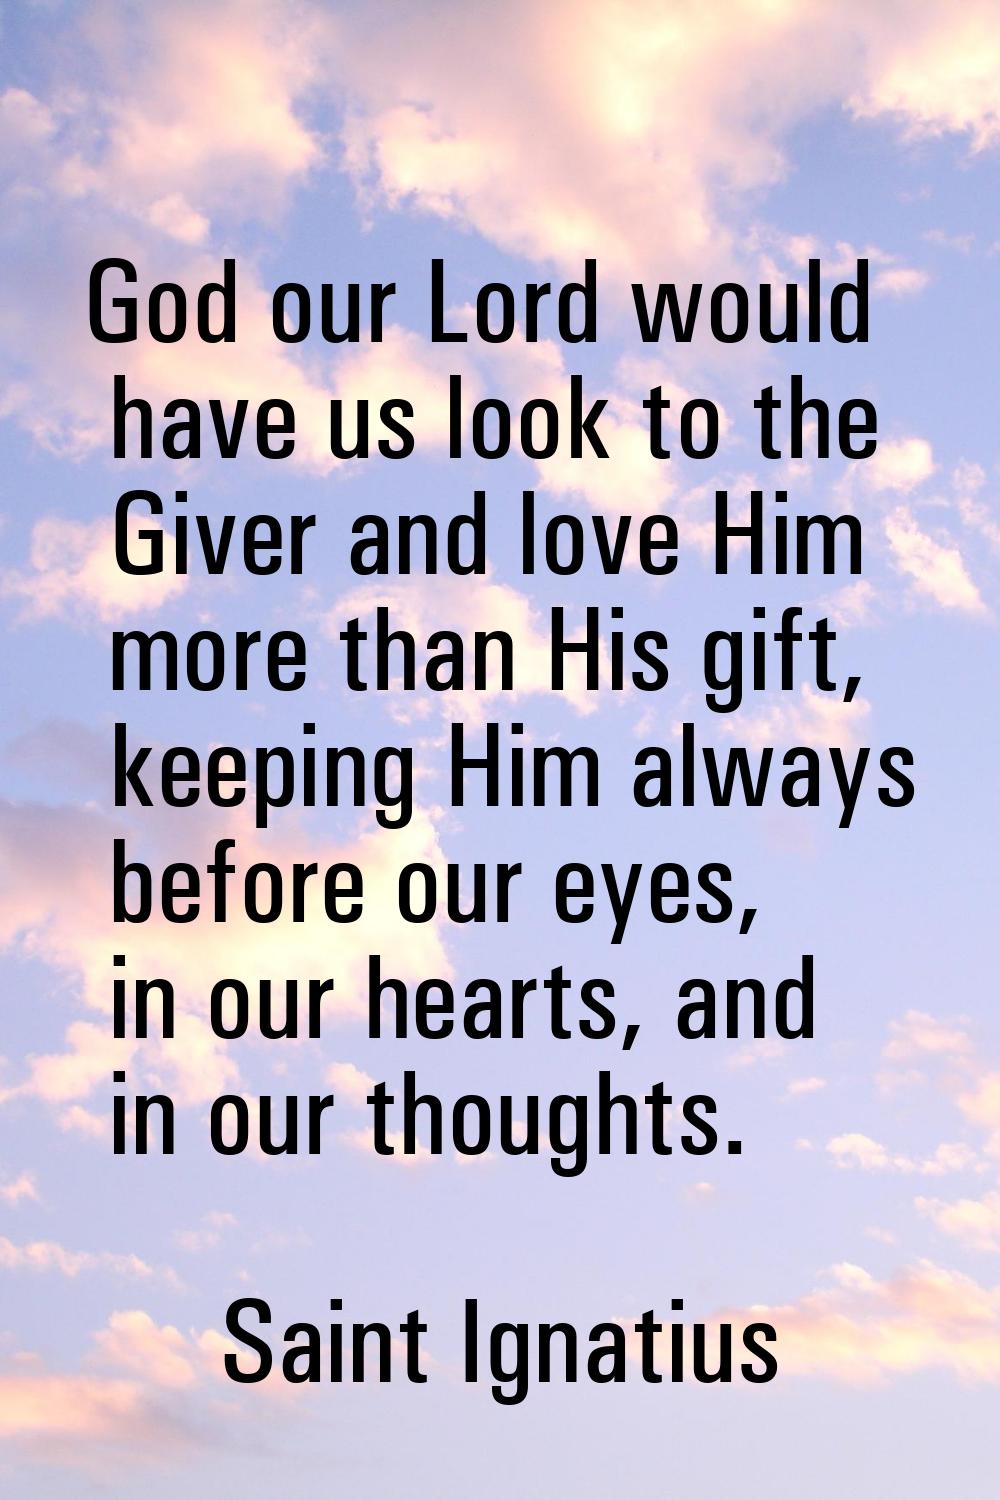 God our Lord would have us look to the Giver and love Him more than His gift, keeping Him always be